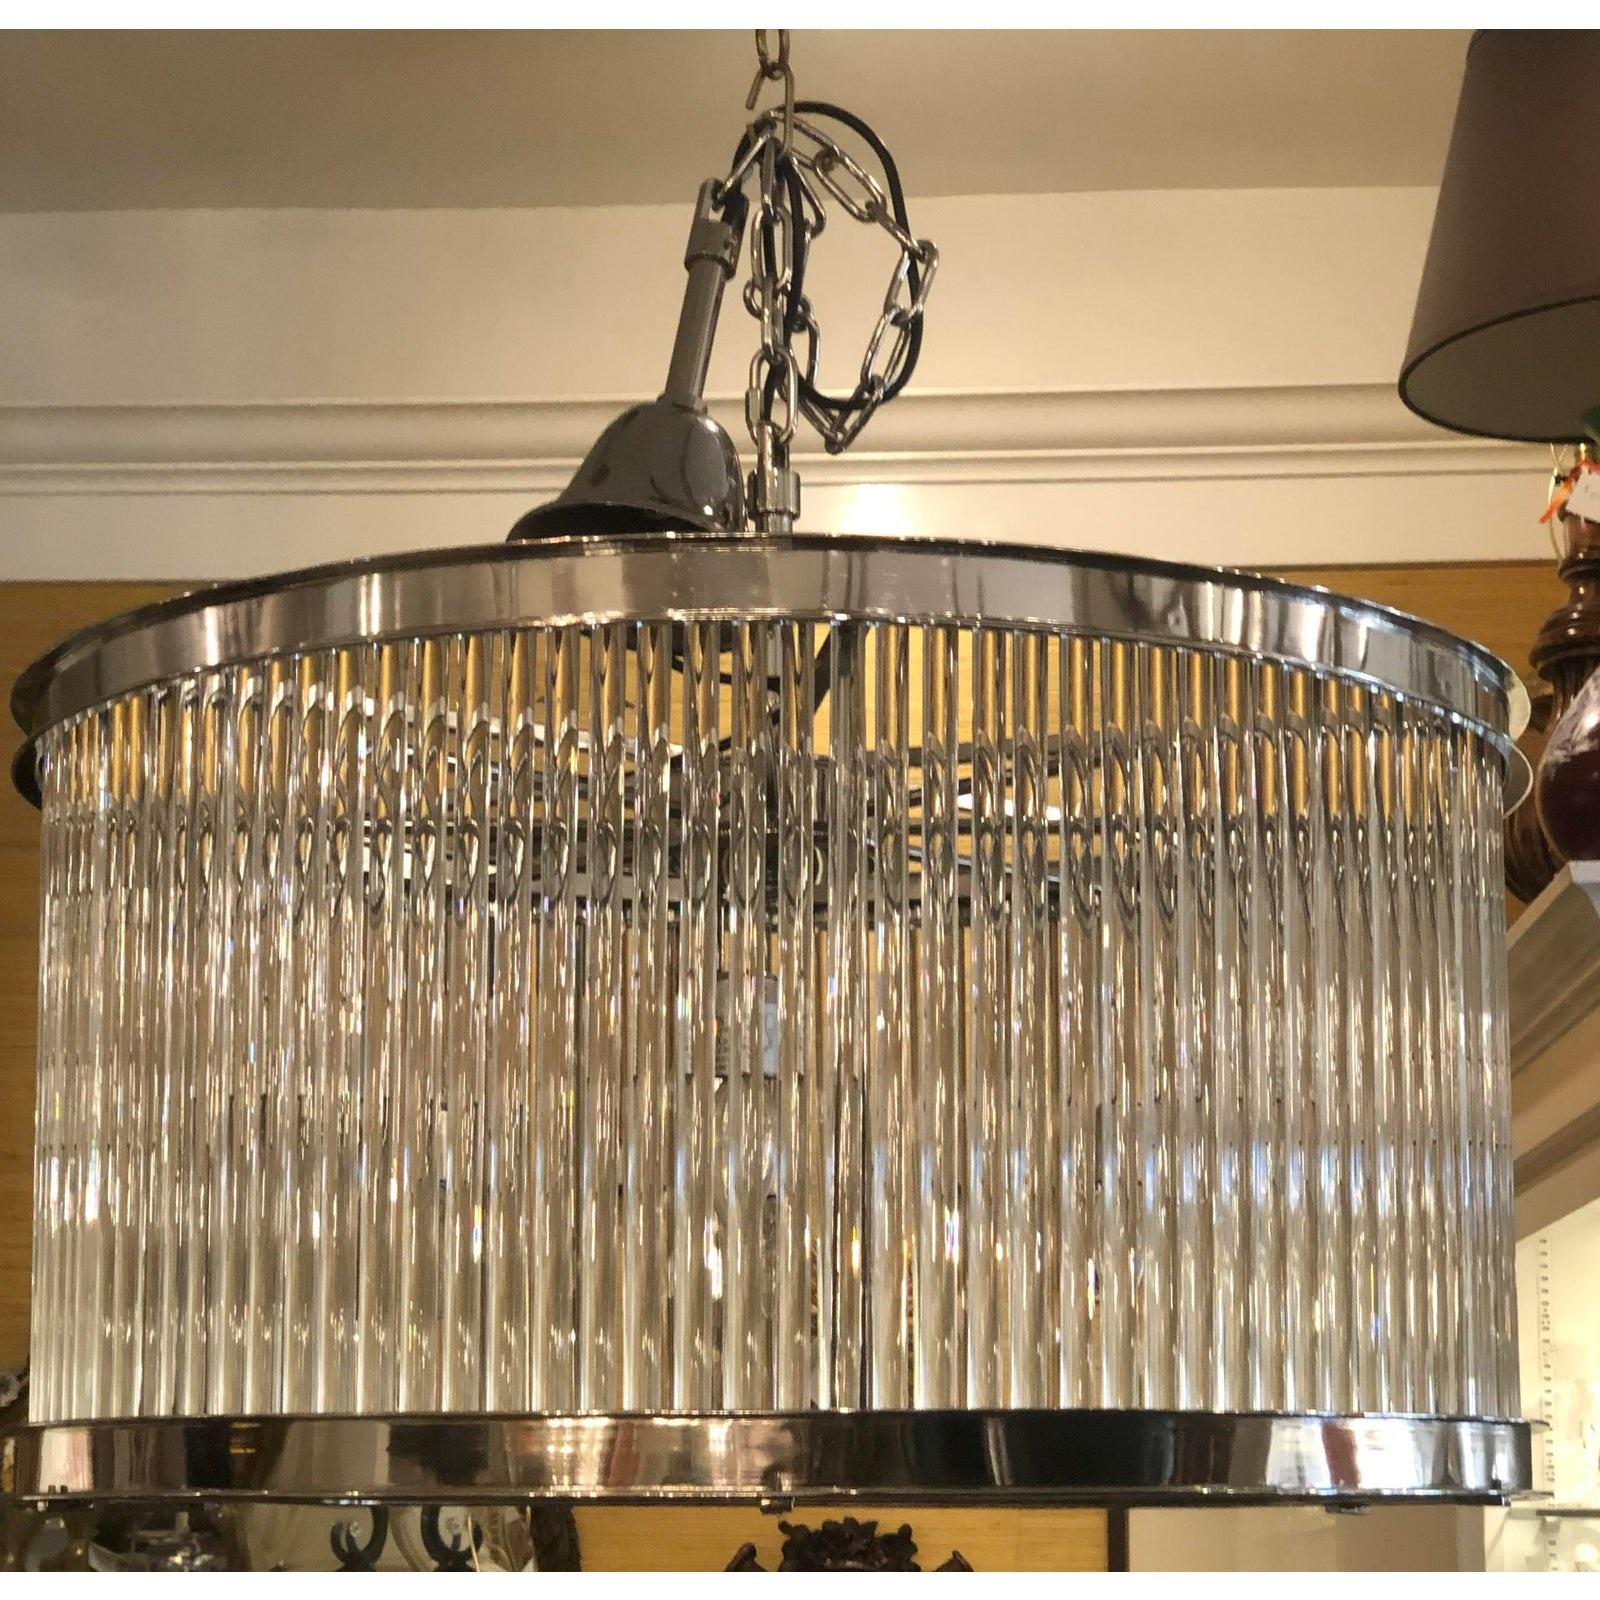 French Art Deco Machine Age glass rod light fixture chandelier. Thick glass rods and nickel-plated finish with opaque glass bottom. The barrel form glass rod section measures 16